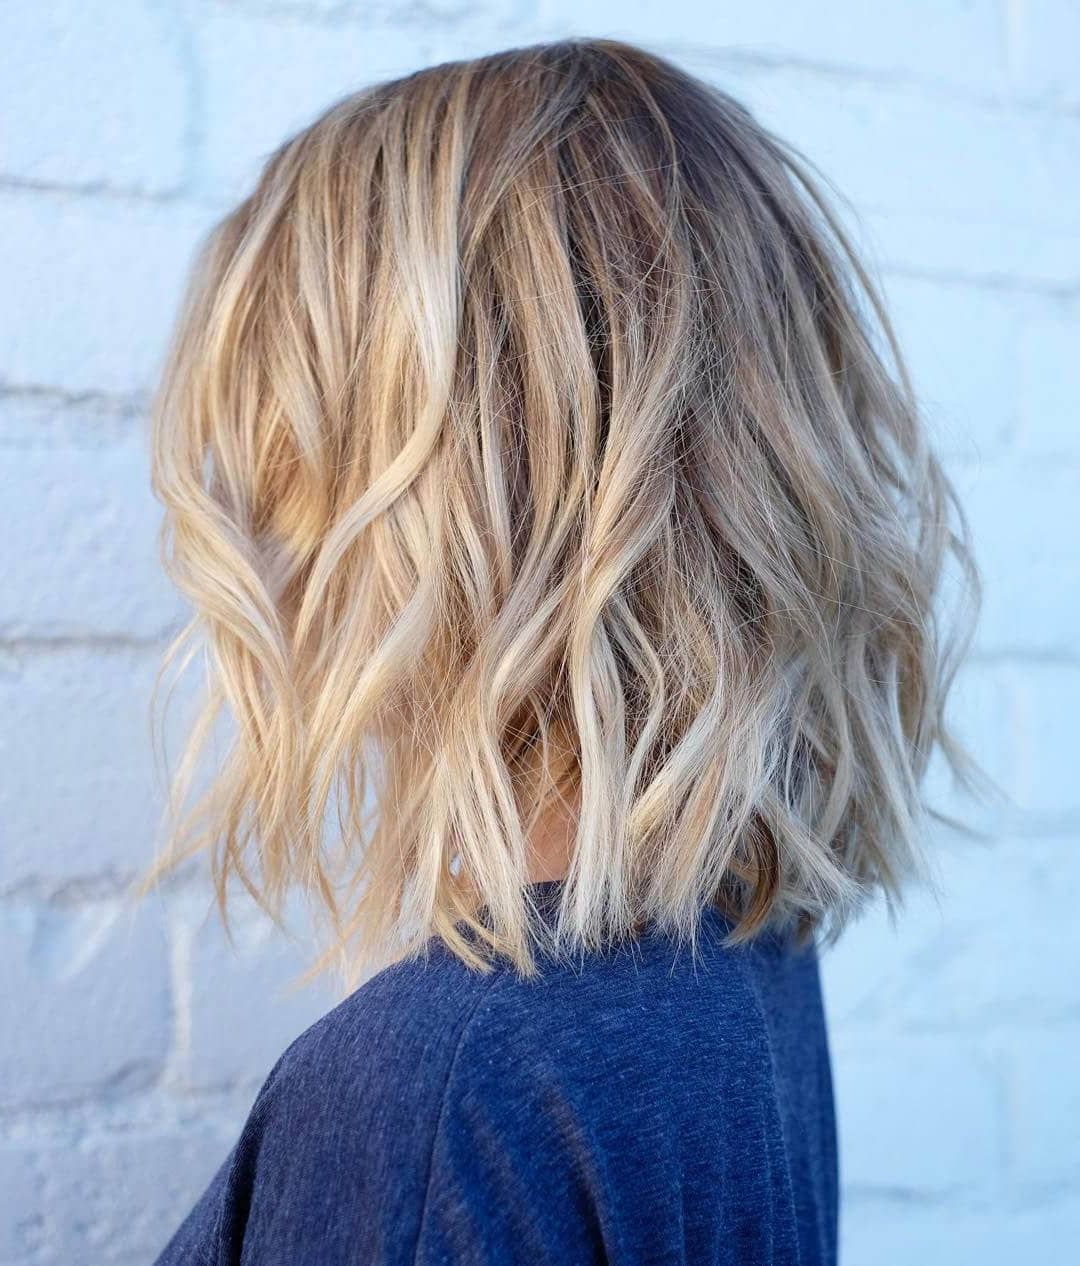 50 Fresh Short Blonde Hair Ideas To Update Your Style In 2018 Intended For Dark Blonde Short Curly Hairstyles (View 9 of 25)